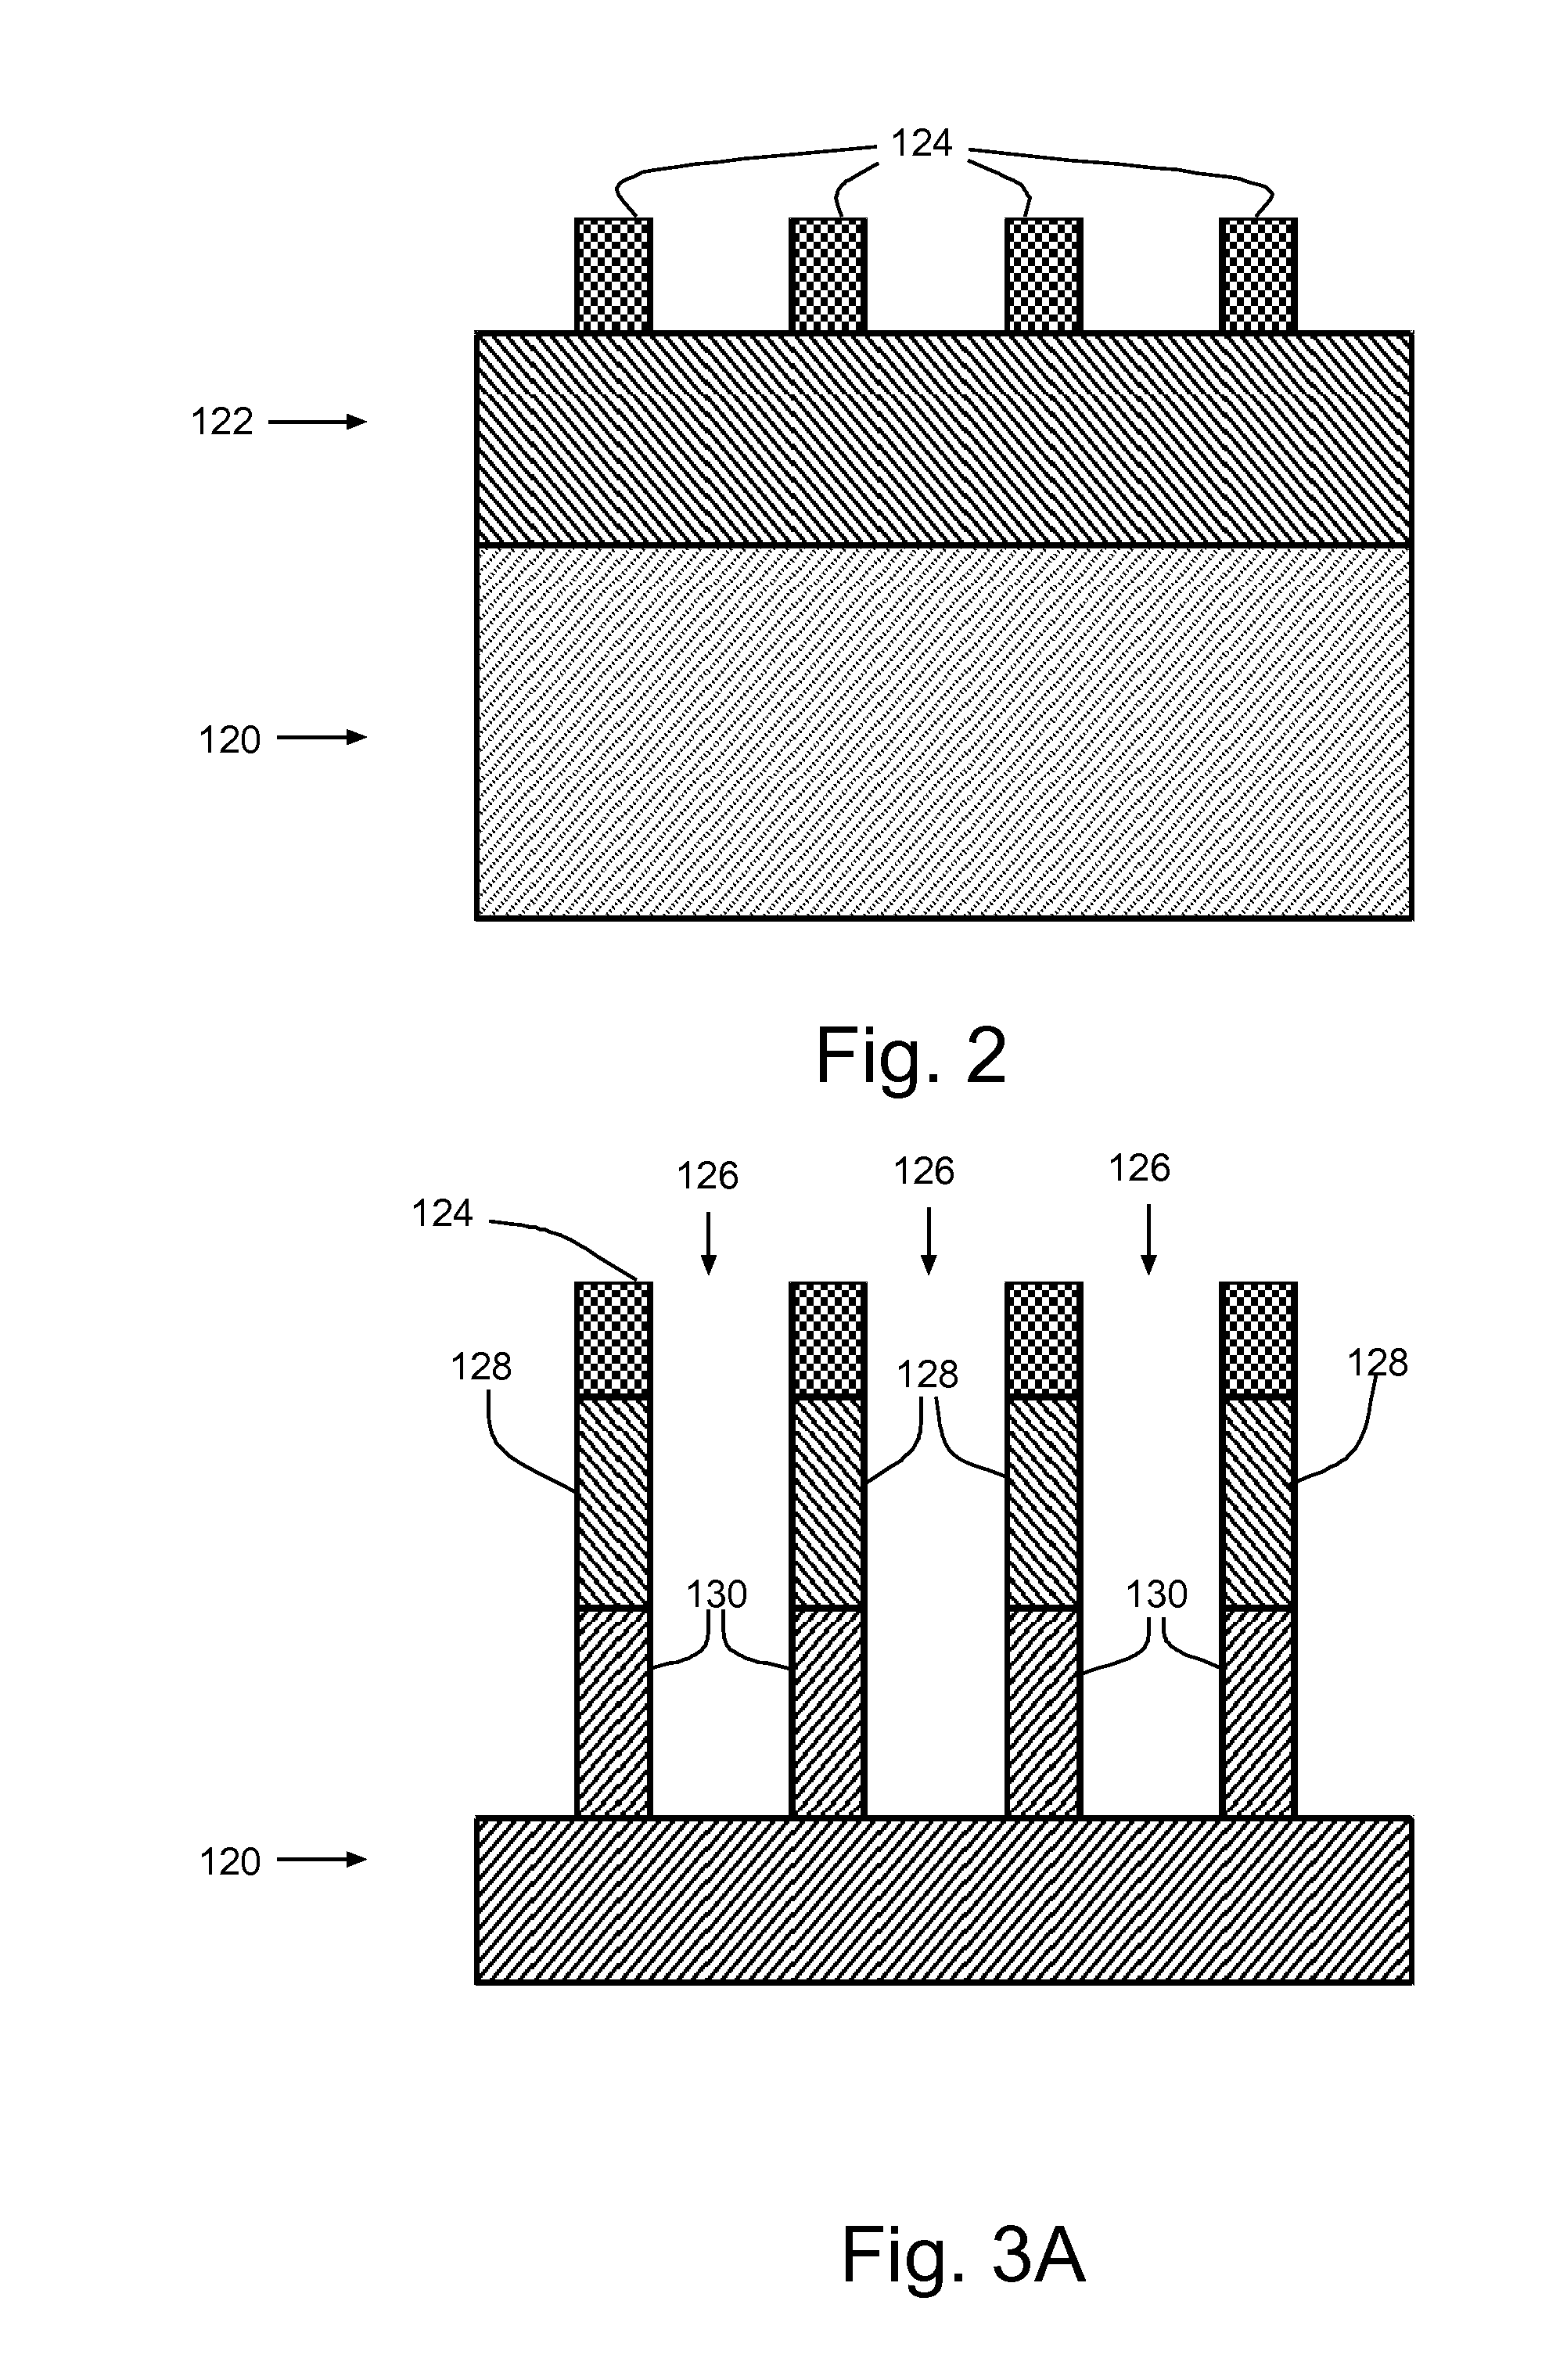 Sub-fin doped bulk fin field effect transistor (finfet), integrated circuit (IC) and method of manufacture